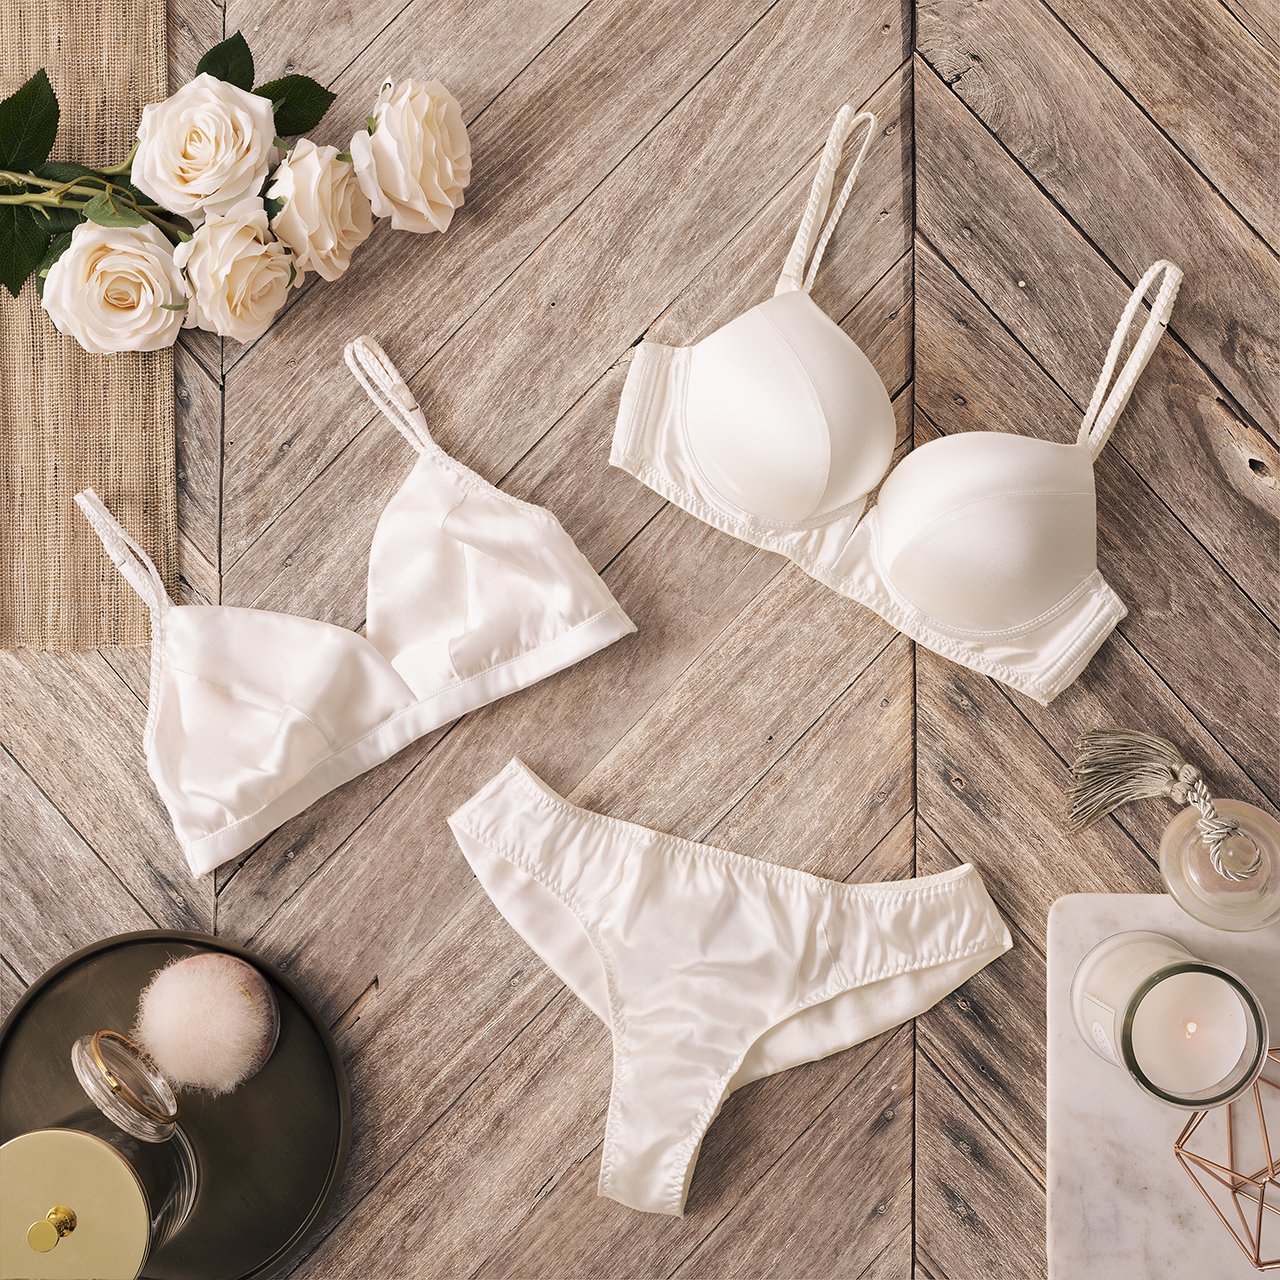 Intimissimi SE: Silk bras, now in triangle and pushup!